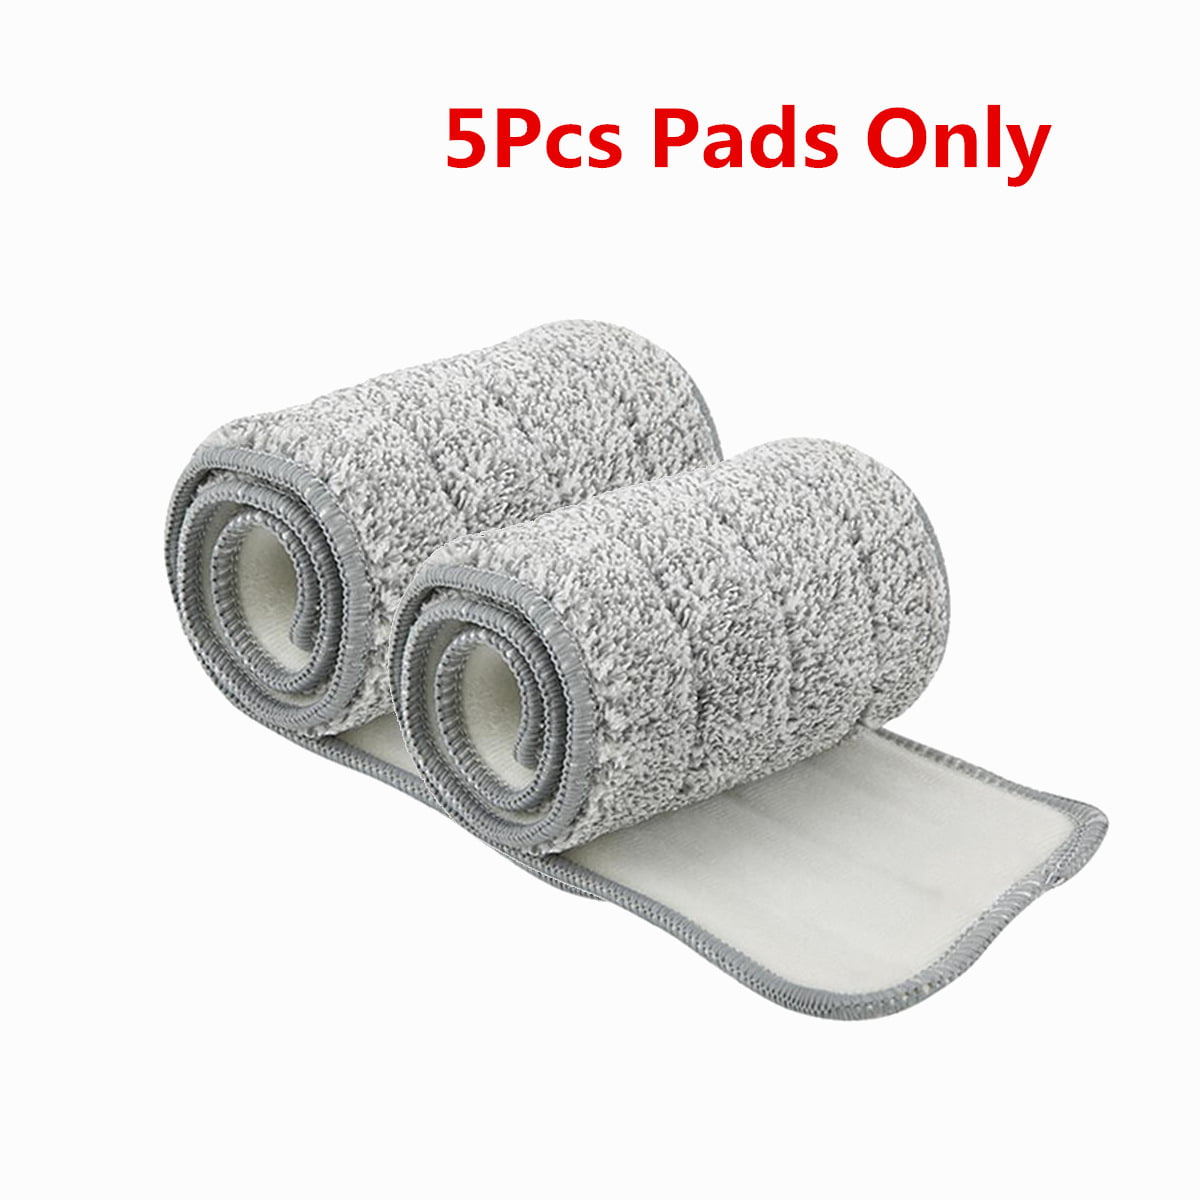 Double Sided Flat Mop Floor Home Cleaner Wet Dry Cleaning Pad Self-Wringing BT 